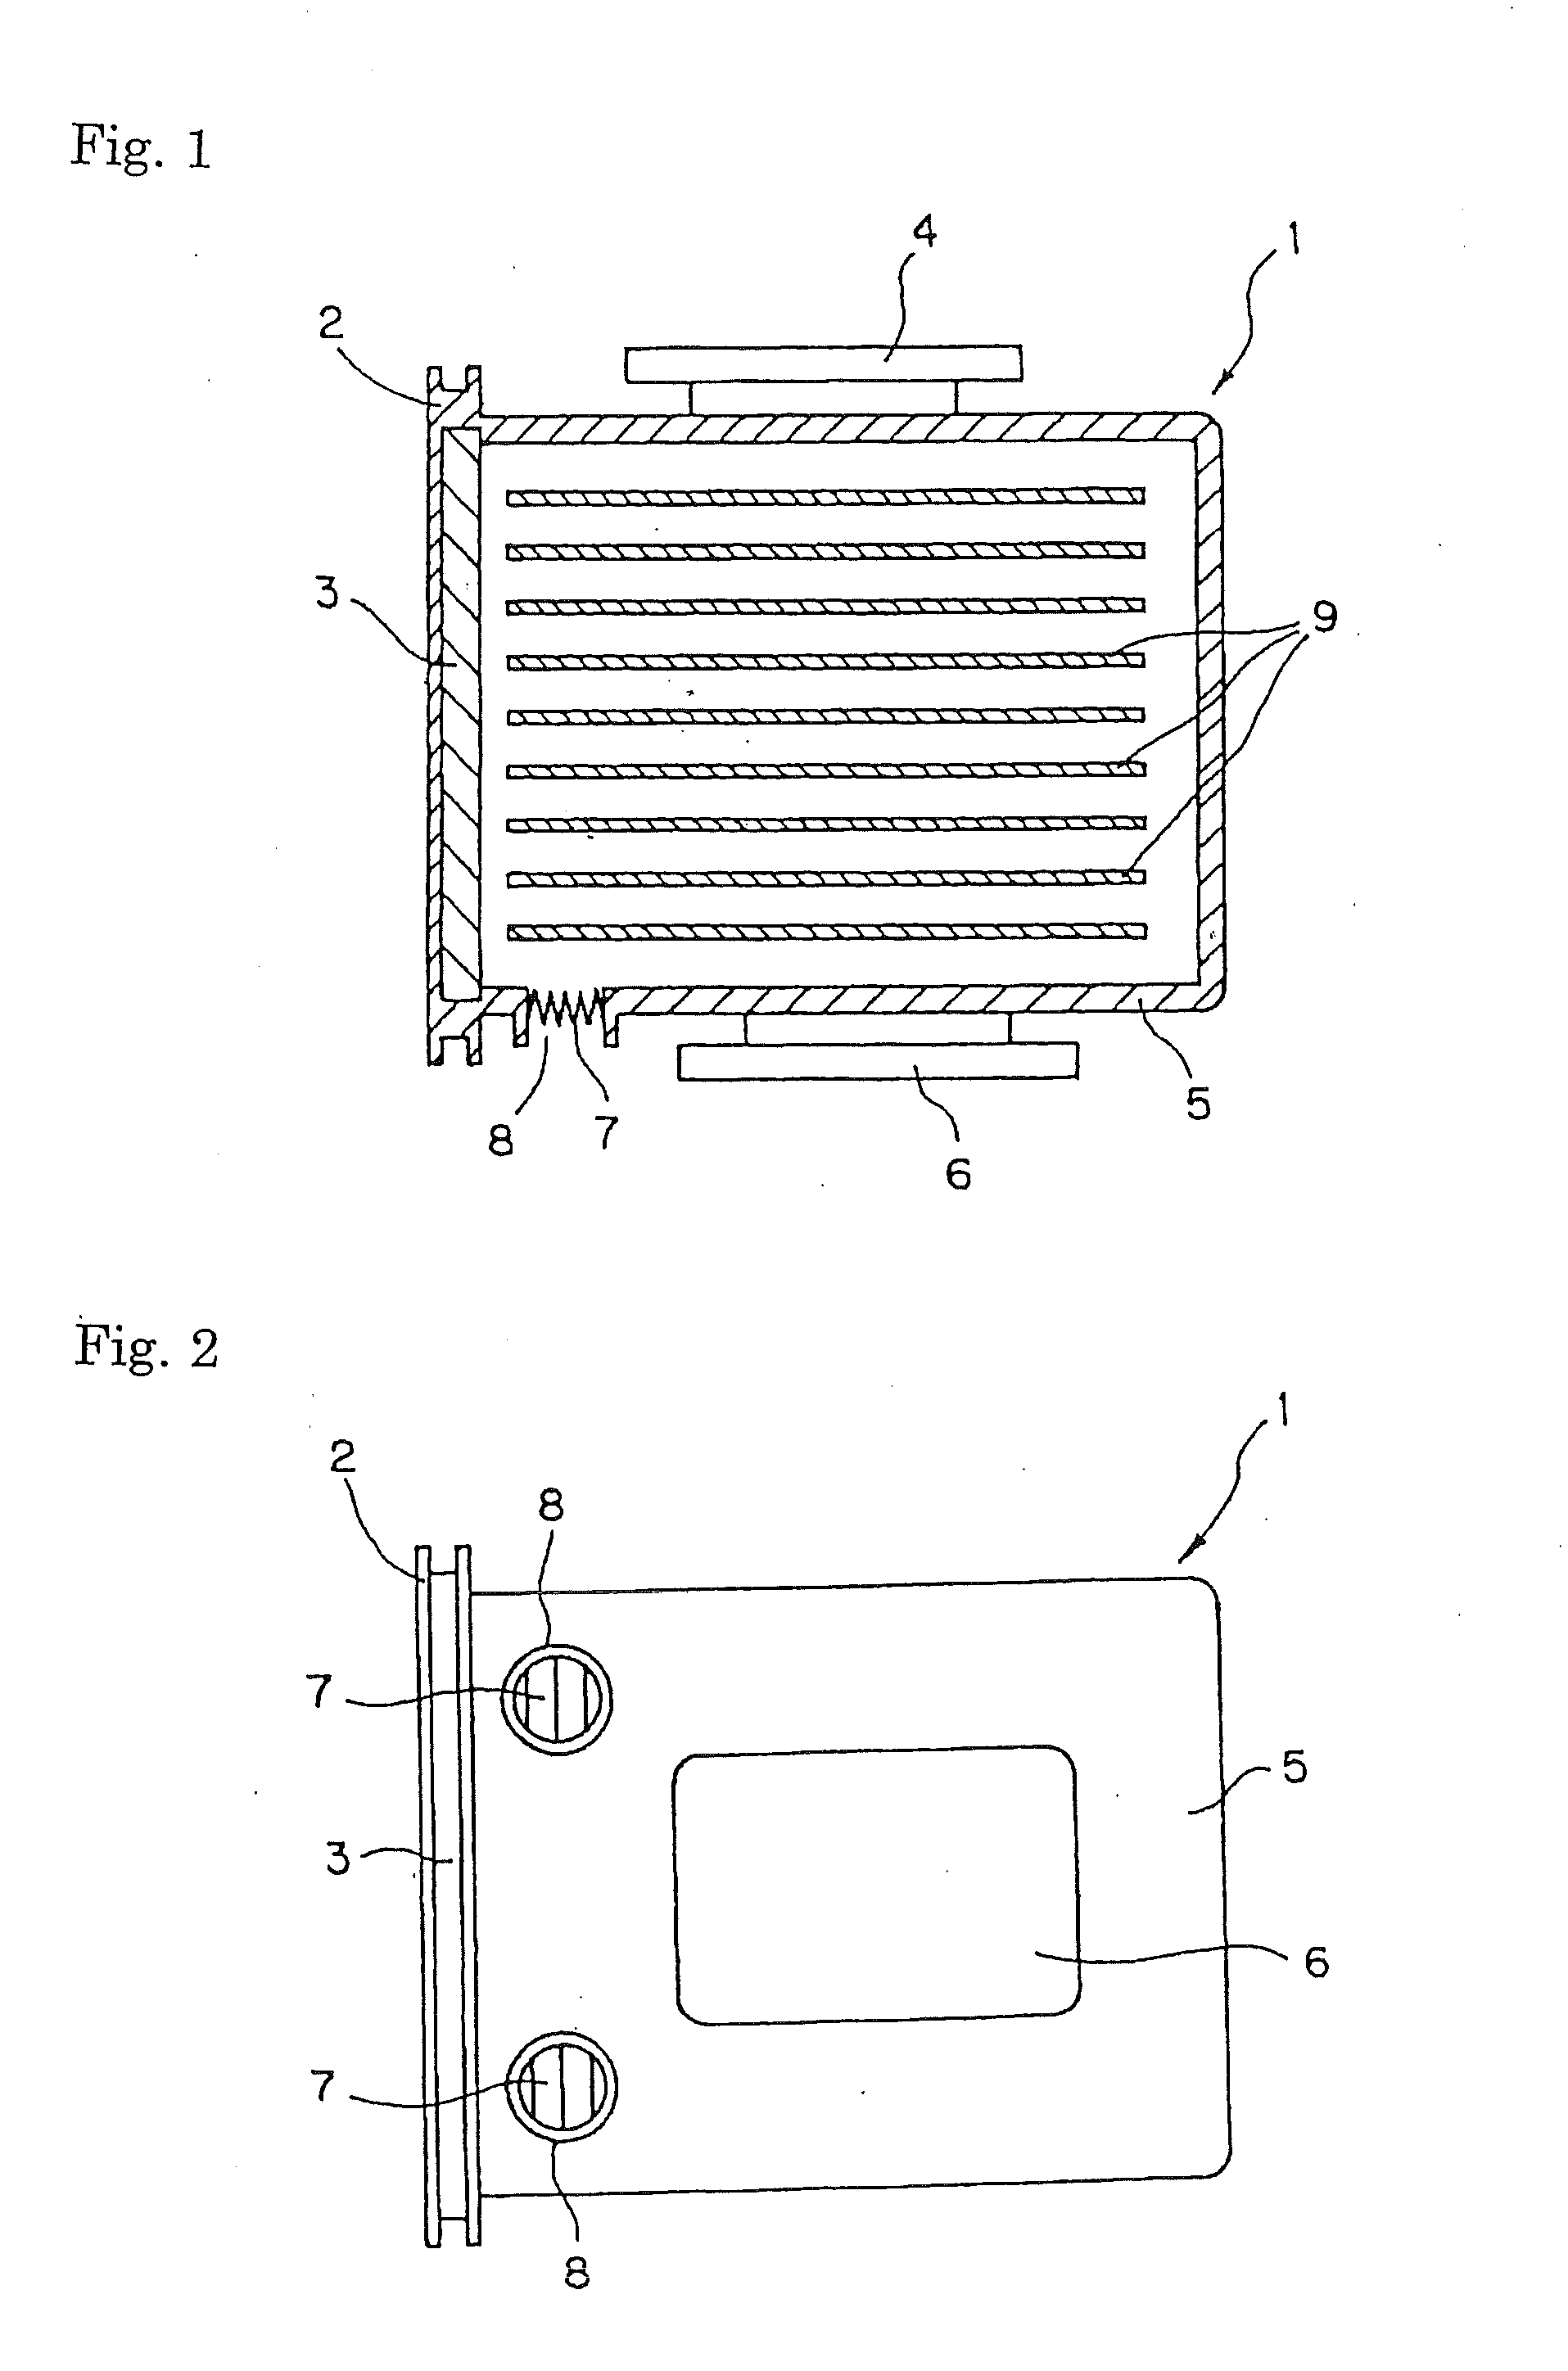 Apparatus for Charging Dry Air or Nitrogen Gas into a Container for Storing Semiconductor Wafers and an Apparatus for Thereby Removing Static Electricity from the Wafers